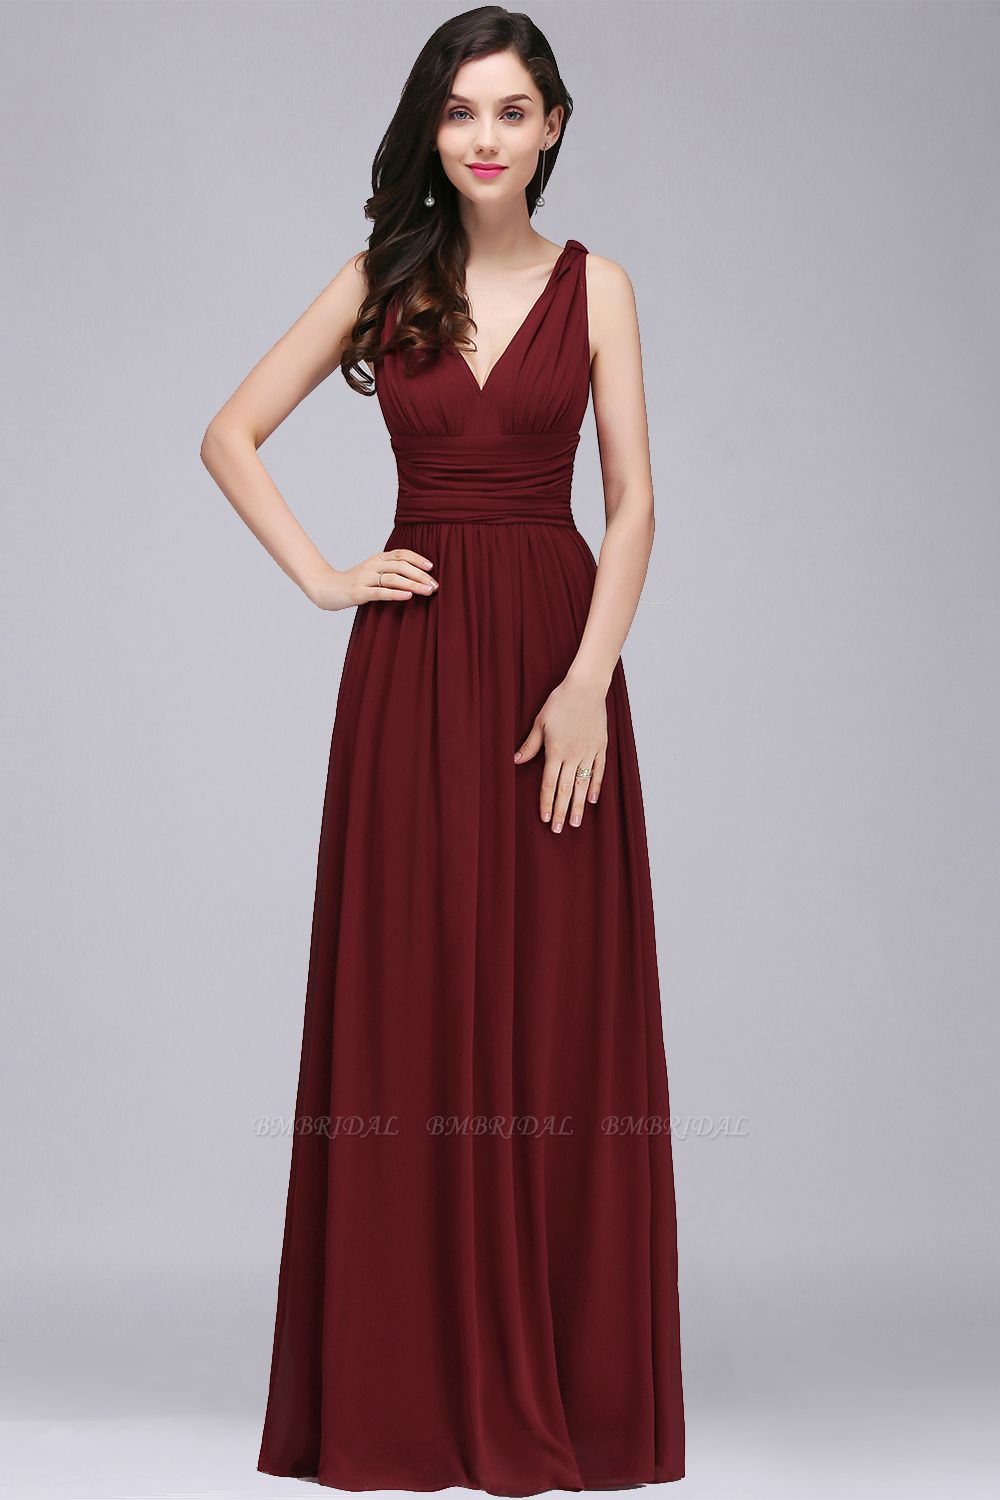 BMbridal Affordable Chiffon V-Neck Burgundy Bridesmaid Dress with Ruffle In Stock